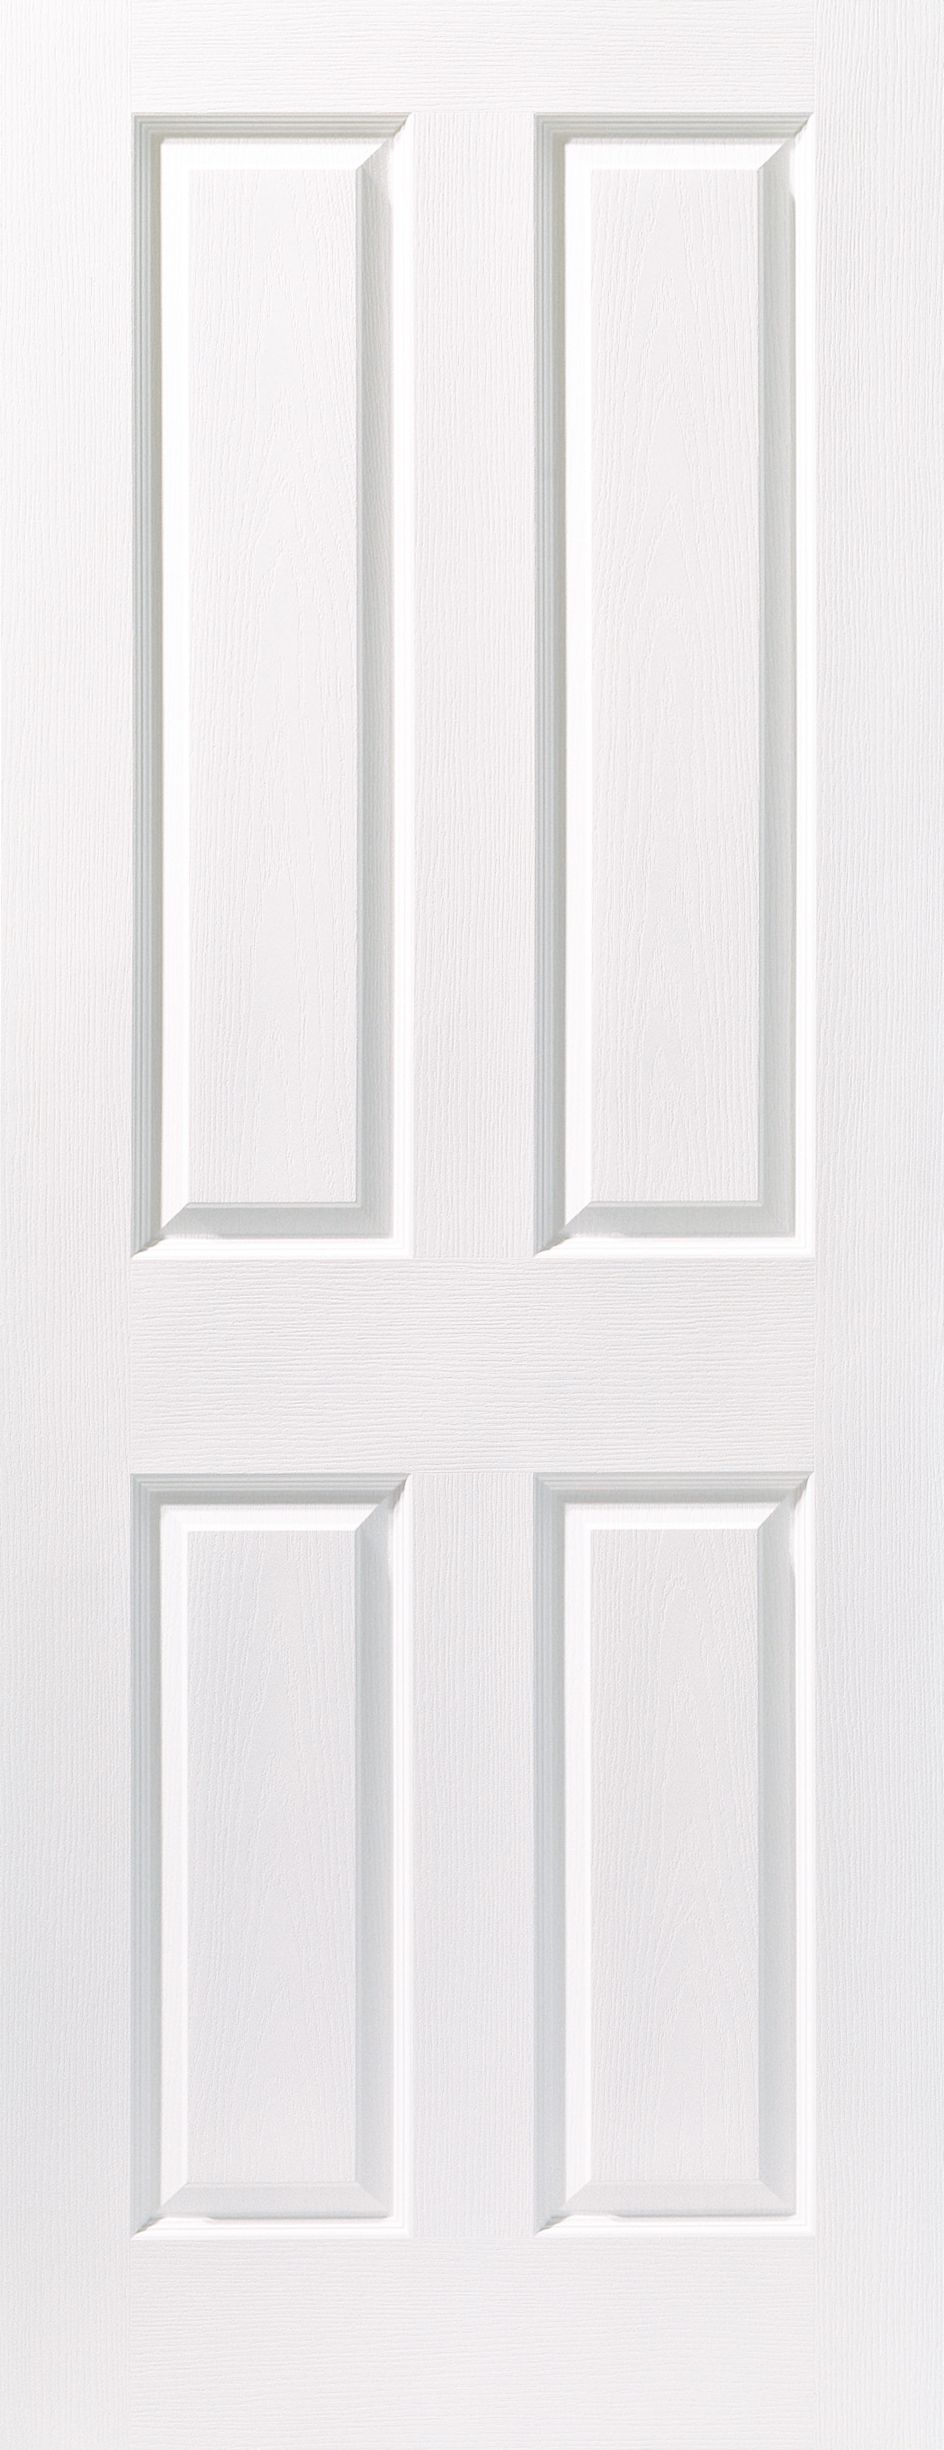 Wickes Chester White Grained Moulded 4 Panel Internal Fire Door - 1981mm